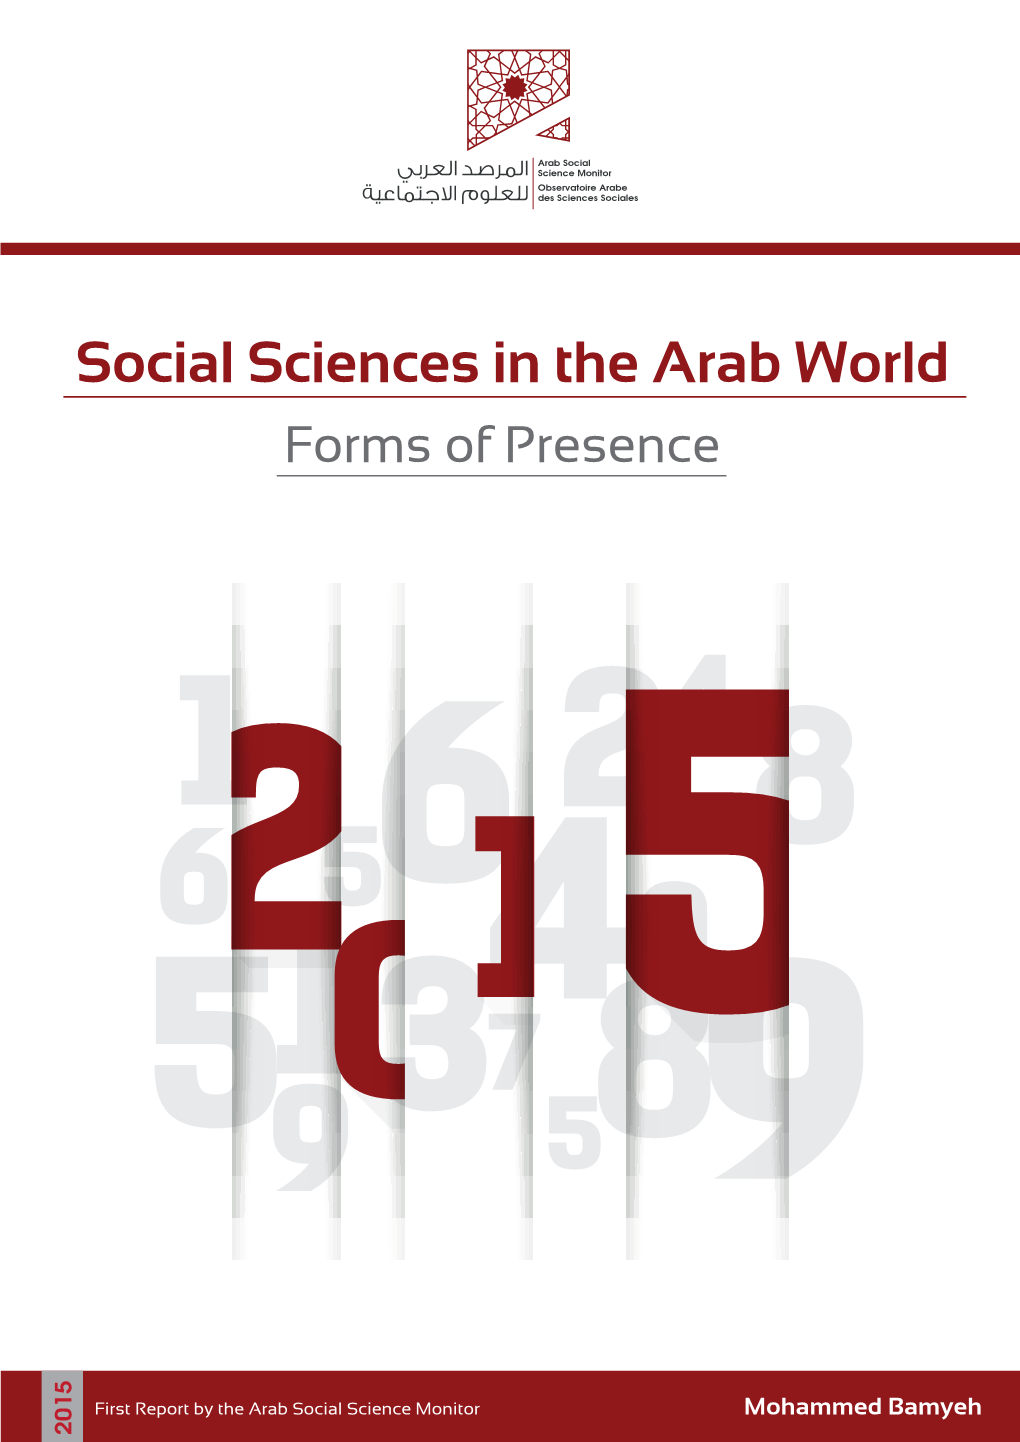 Social Sciences in the Arab World Forms of Presence